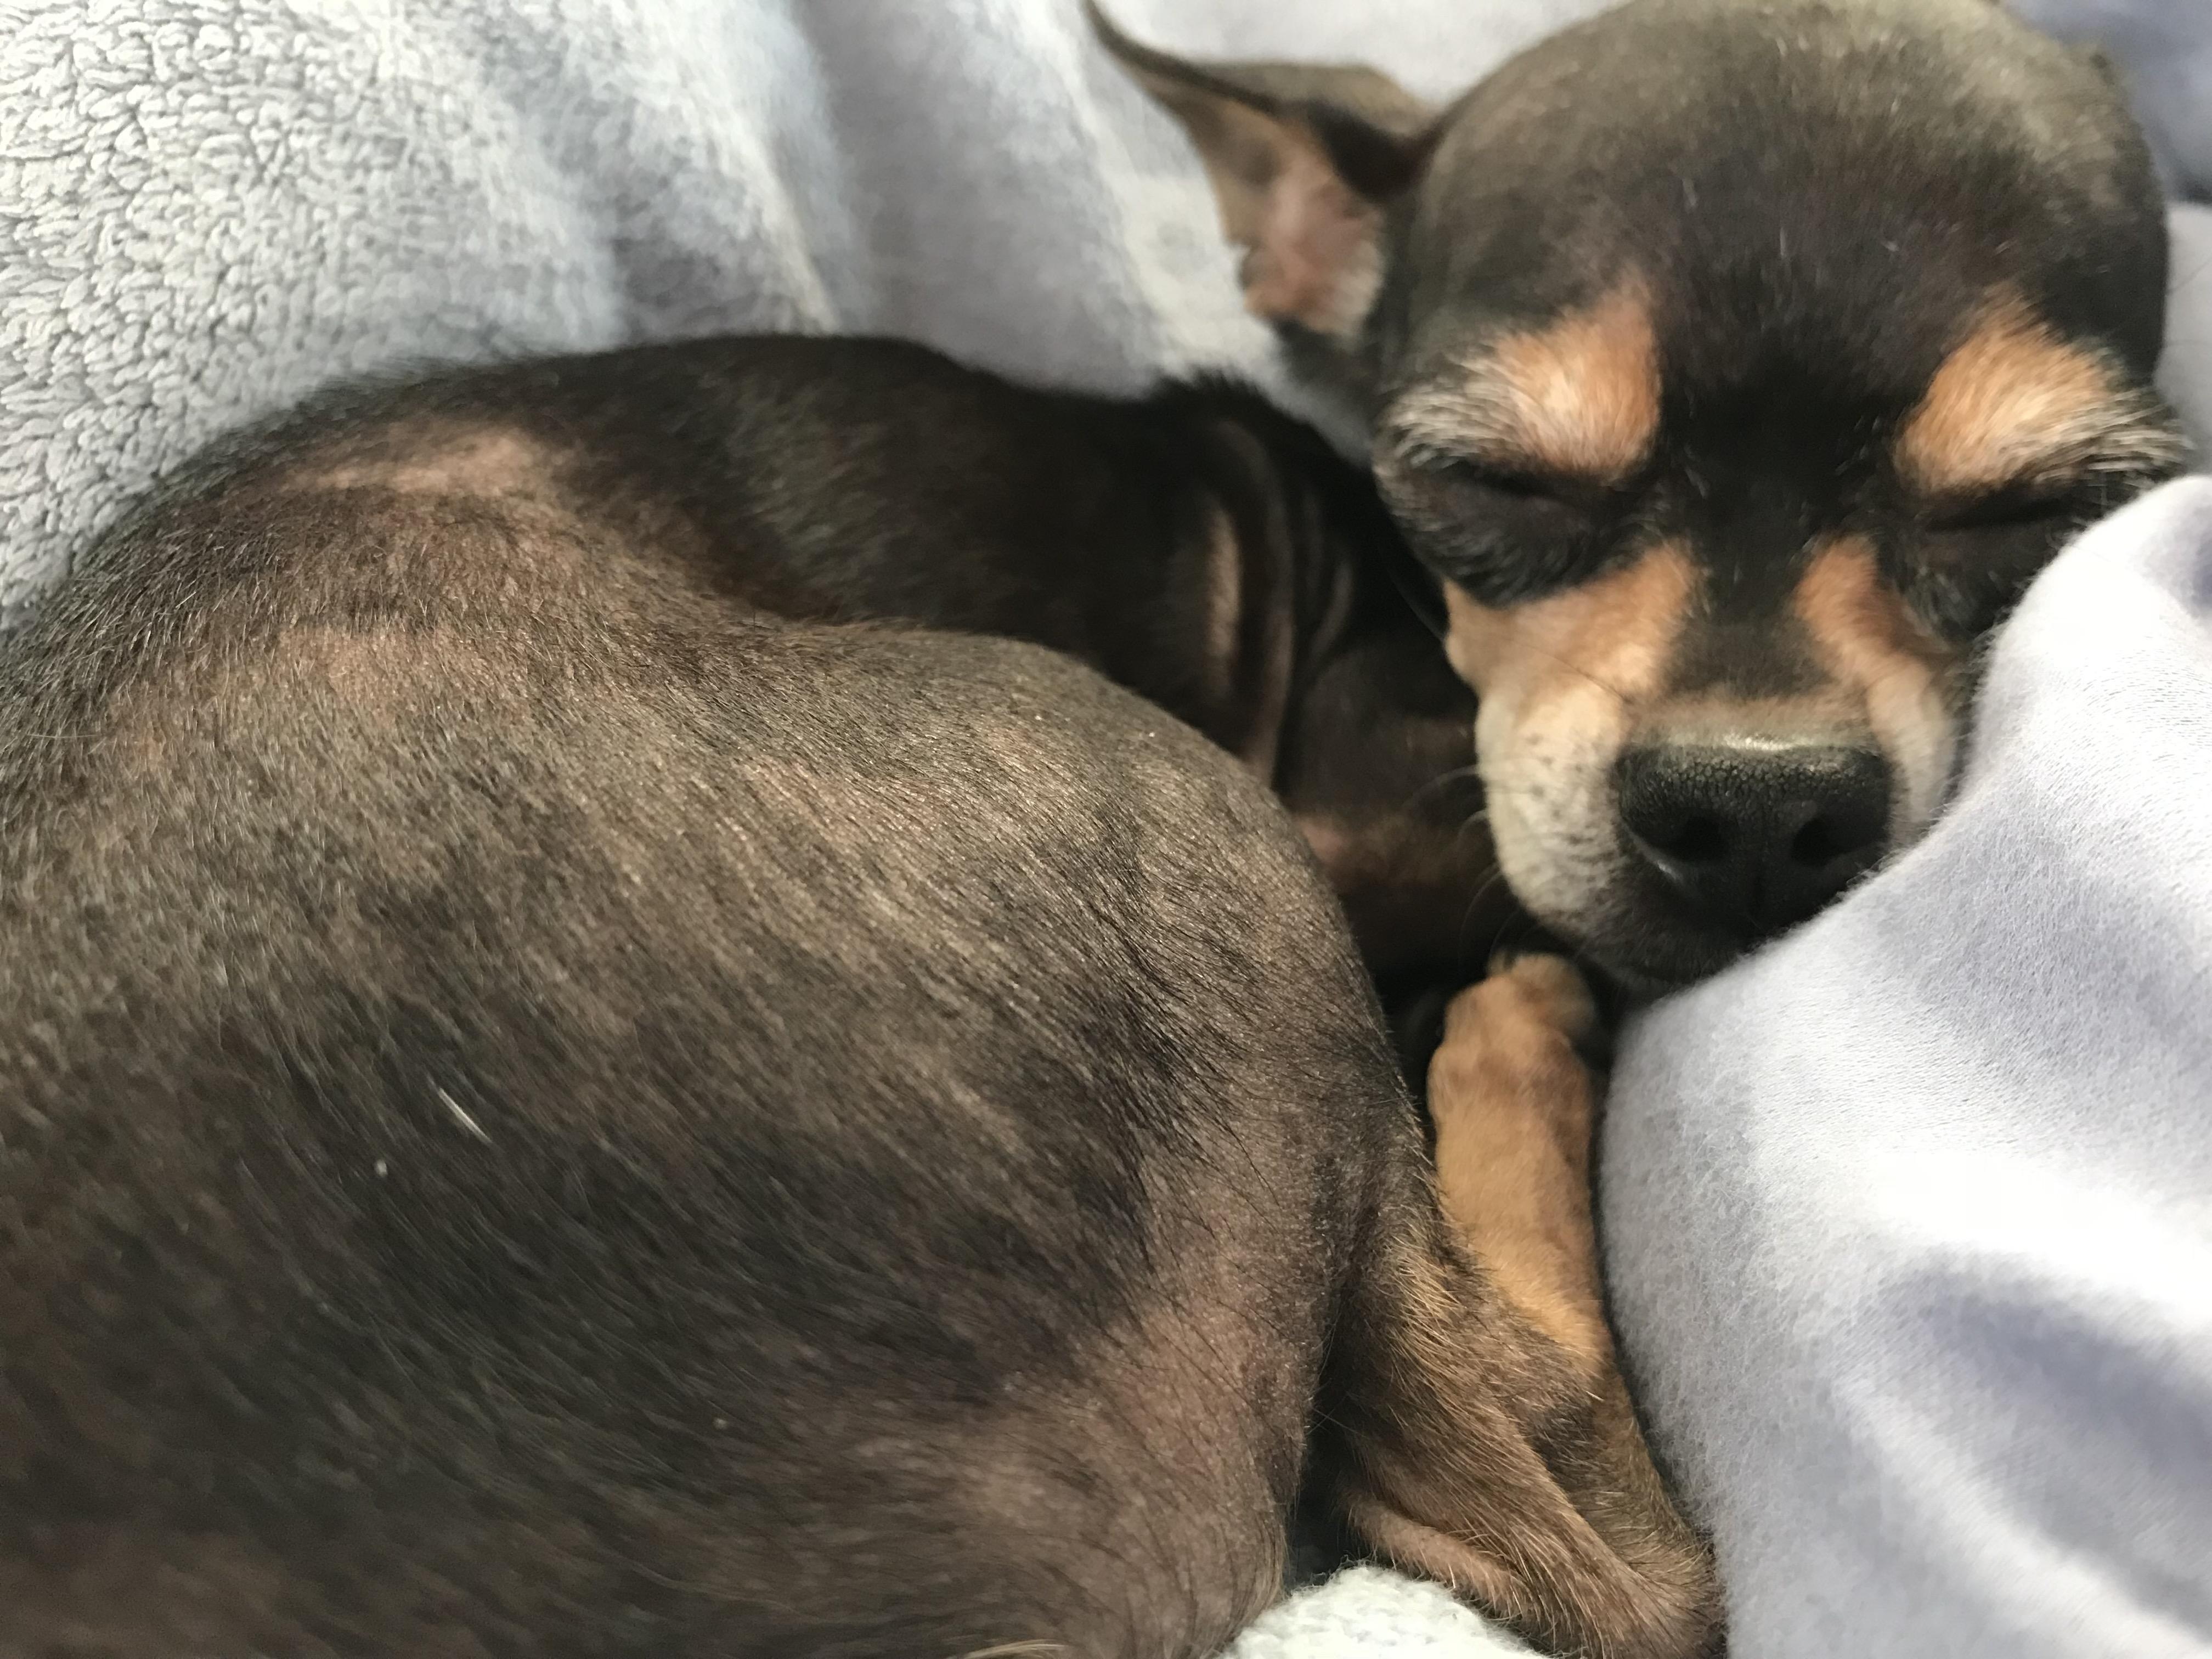 Chihuahua curled up sleeping